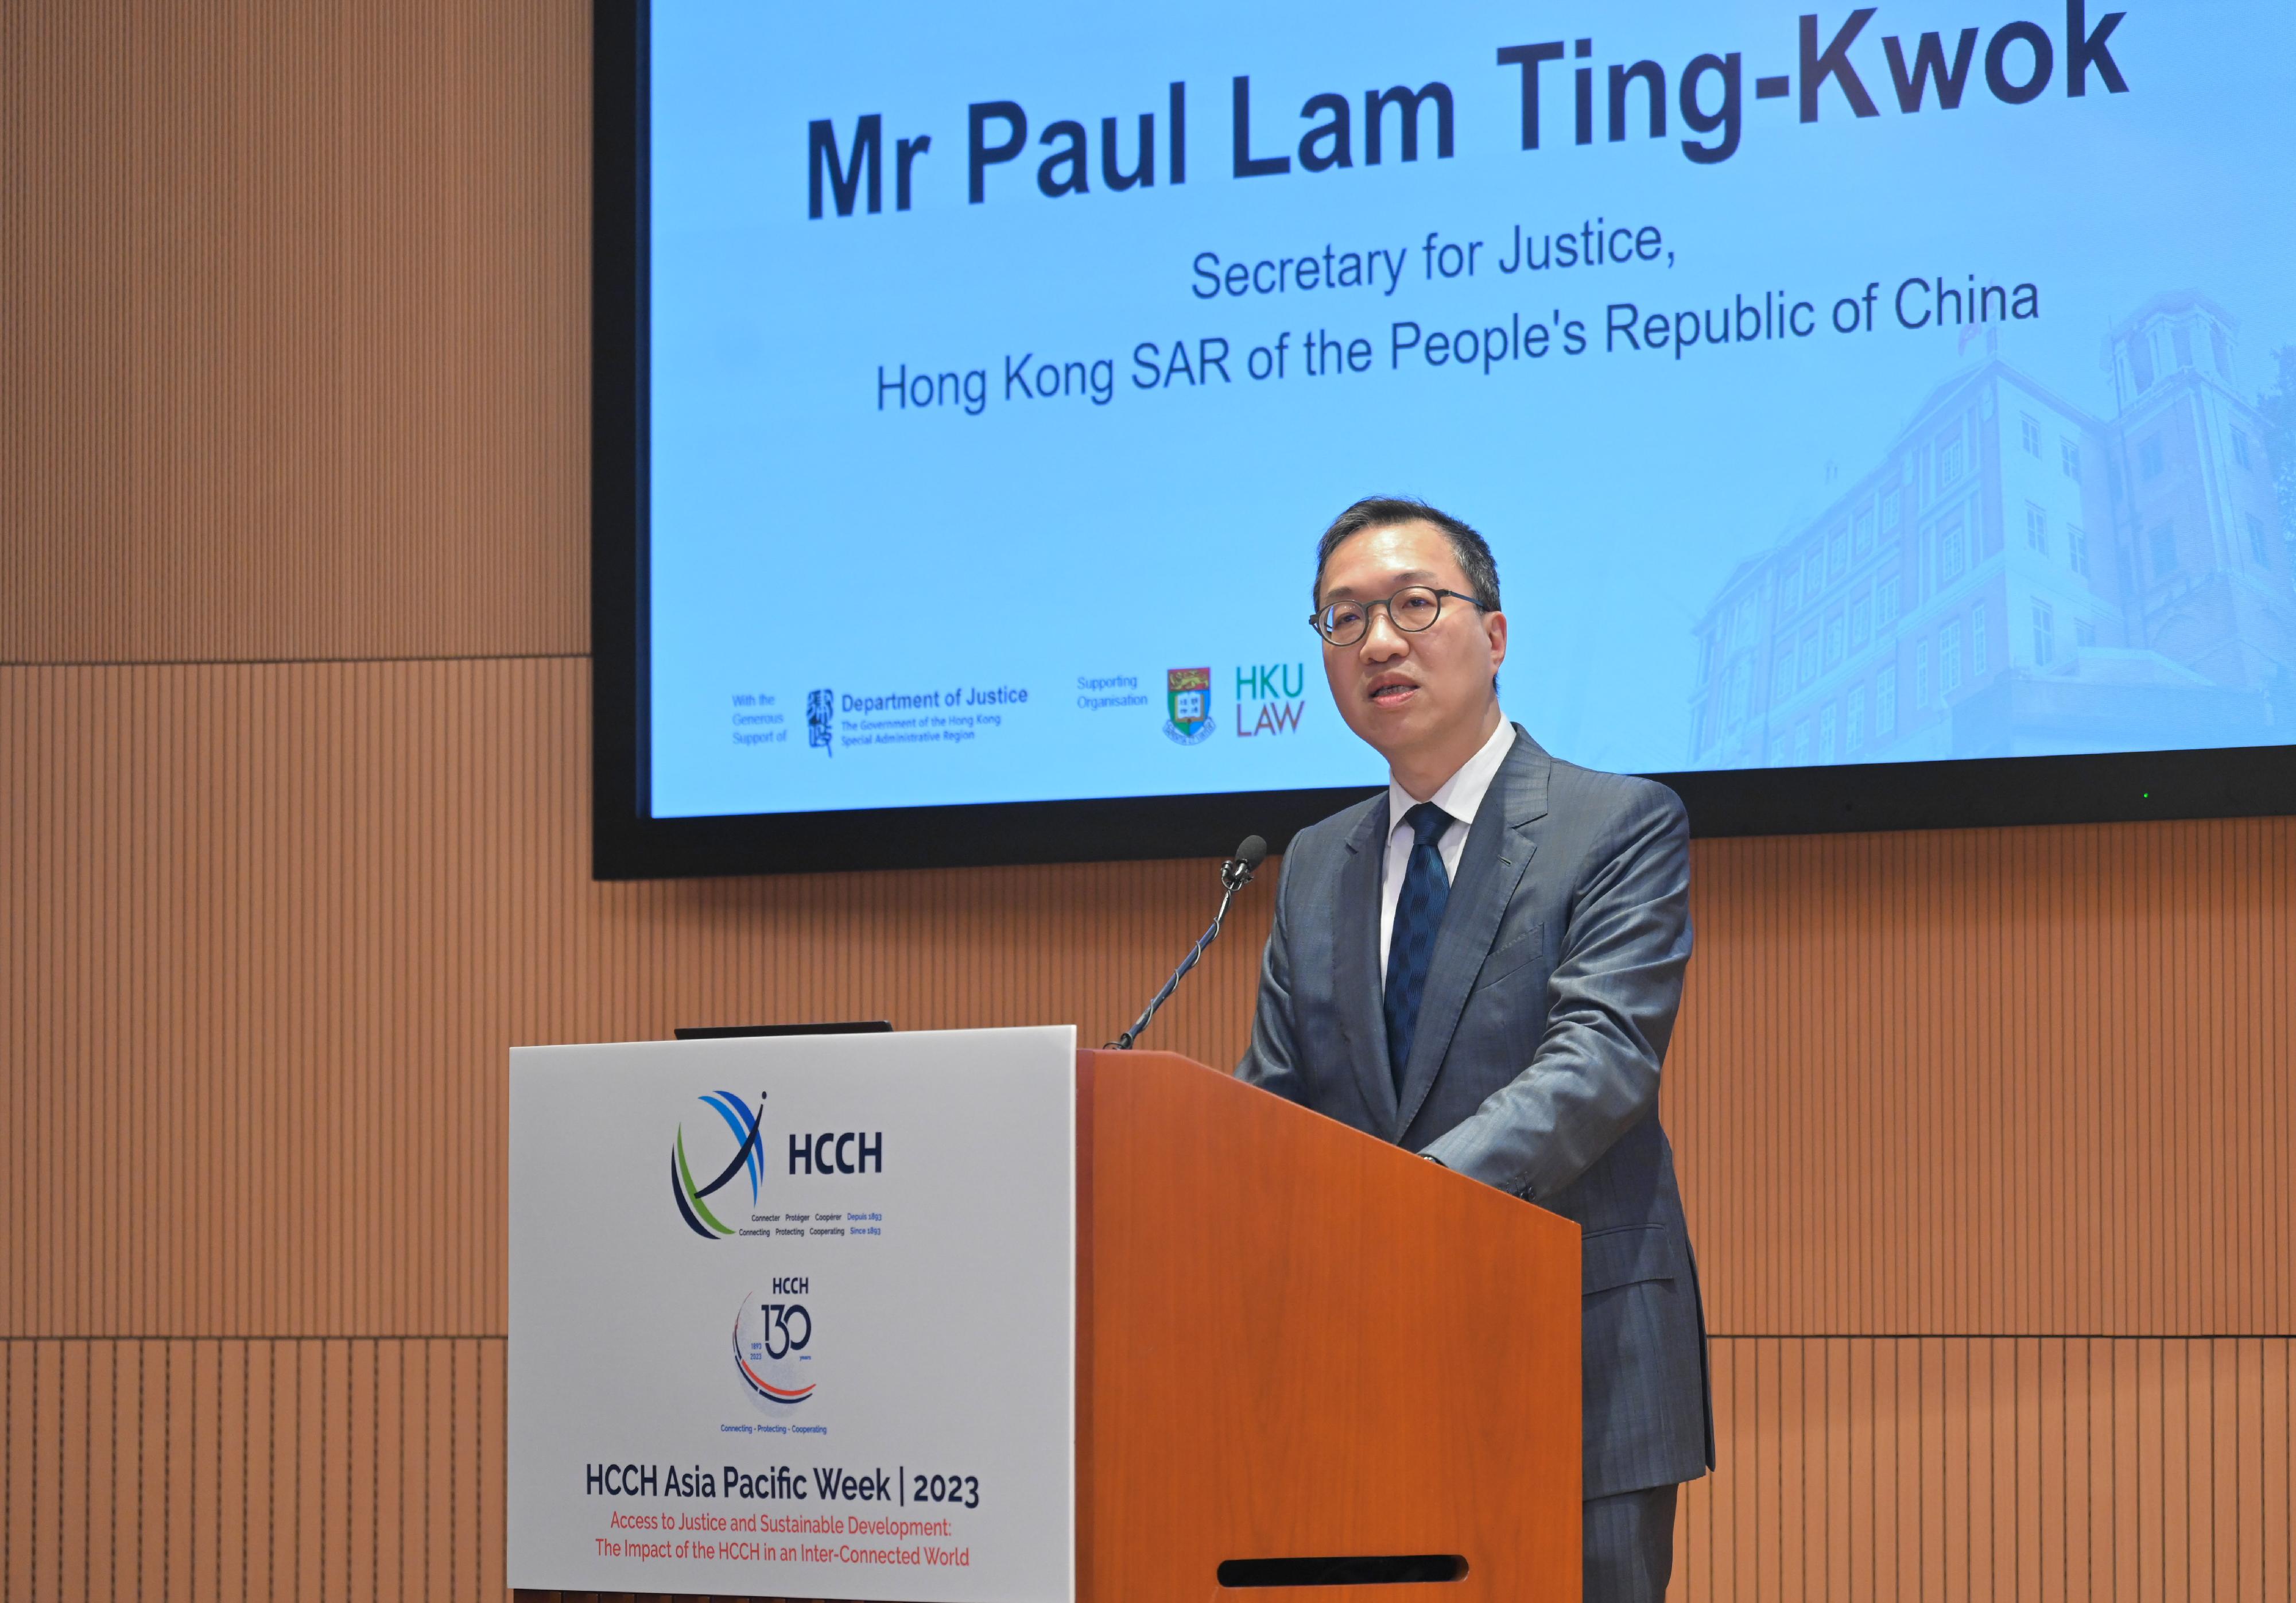 The Secretary for Justice, Mr Paul Lam, SC, speaks at the opening of the HCCH Asia Pacific Week 2023 - Access to Justice and Sustainable Development: The Impact of the HCCH in an Inter-Connected World today (September 11).

